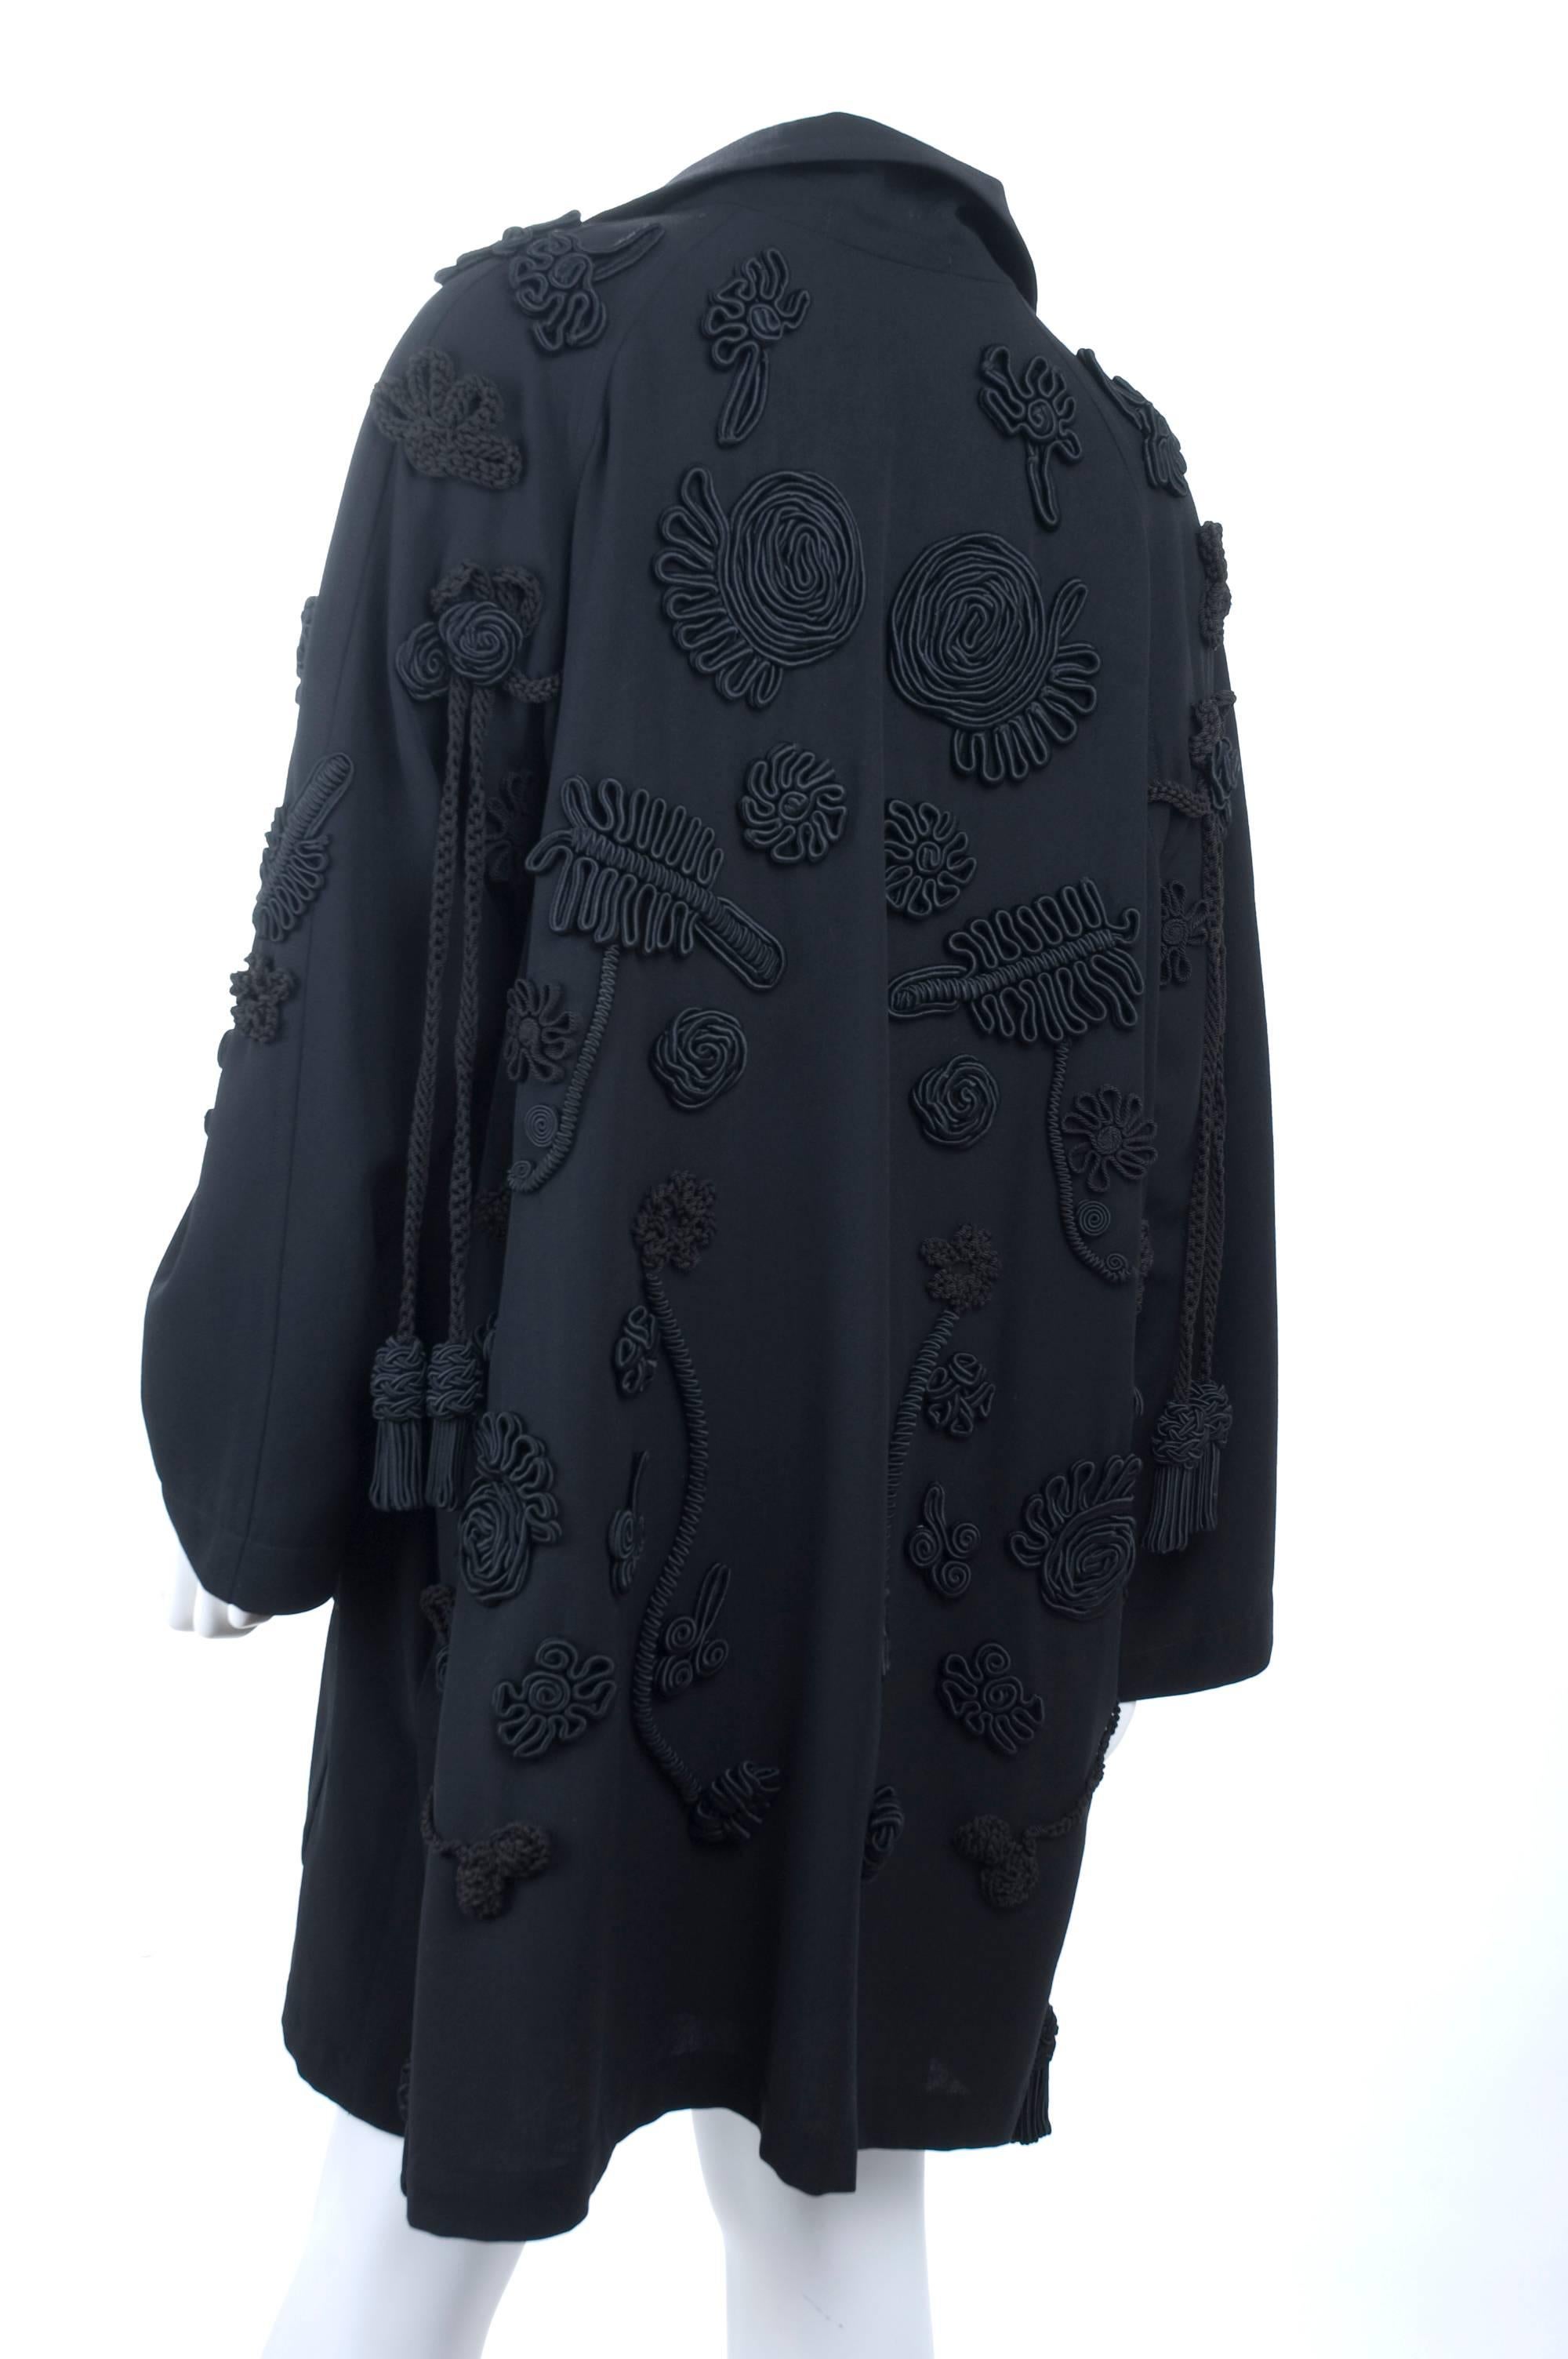 90's Yohji Yamamoto Black Coat with Corded Embroidery + Tassels Allover. In Excellent Condition For Sale In Hamburg, Deutschland